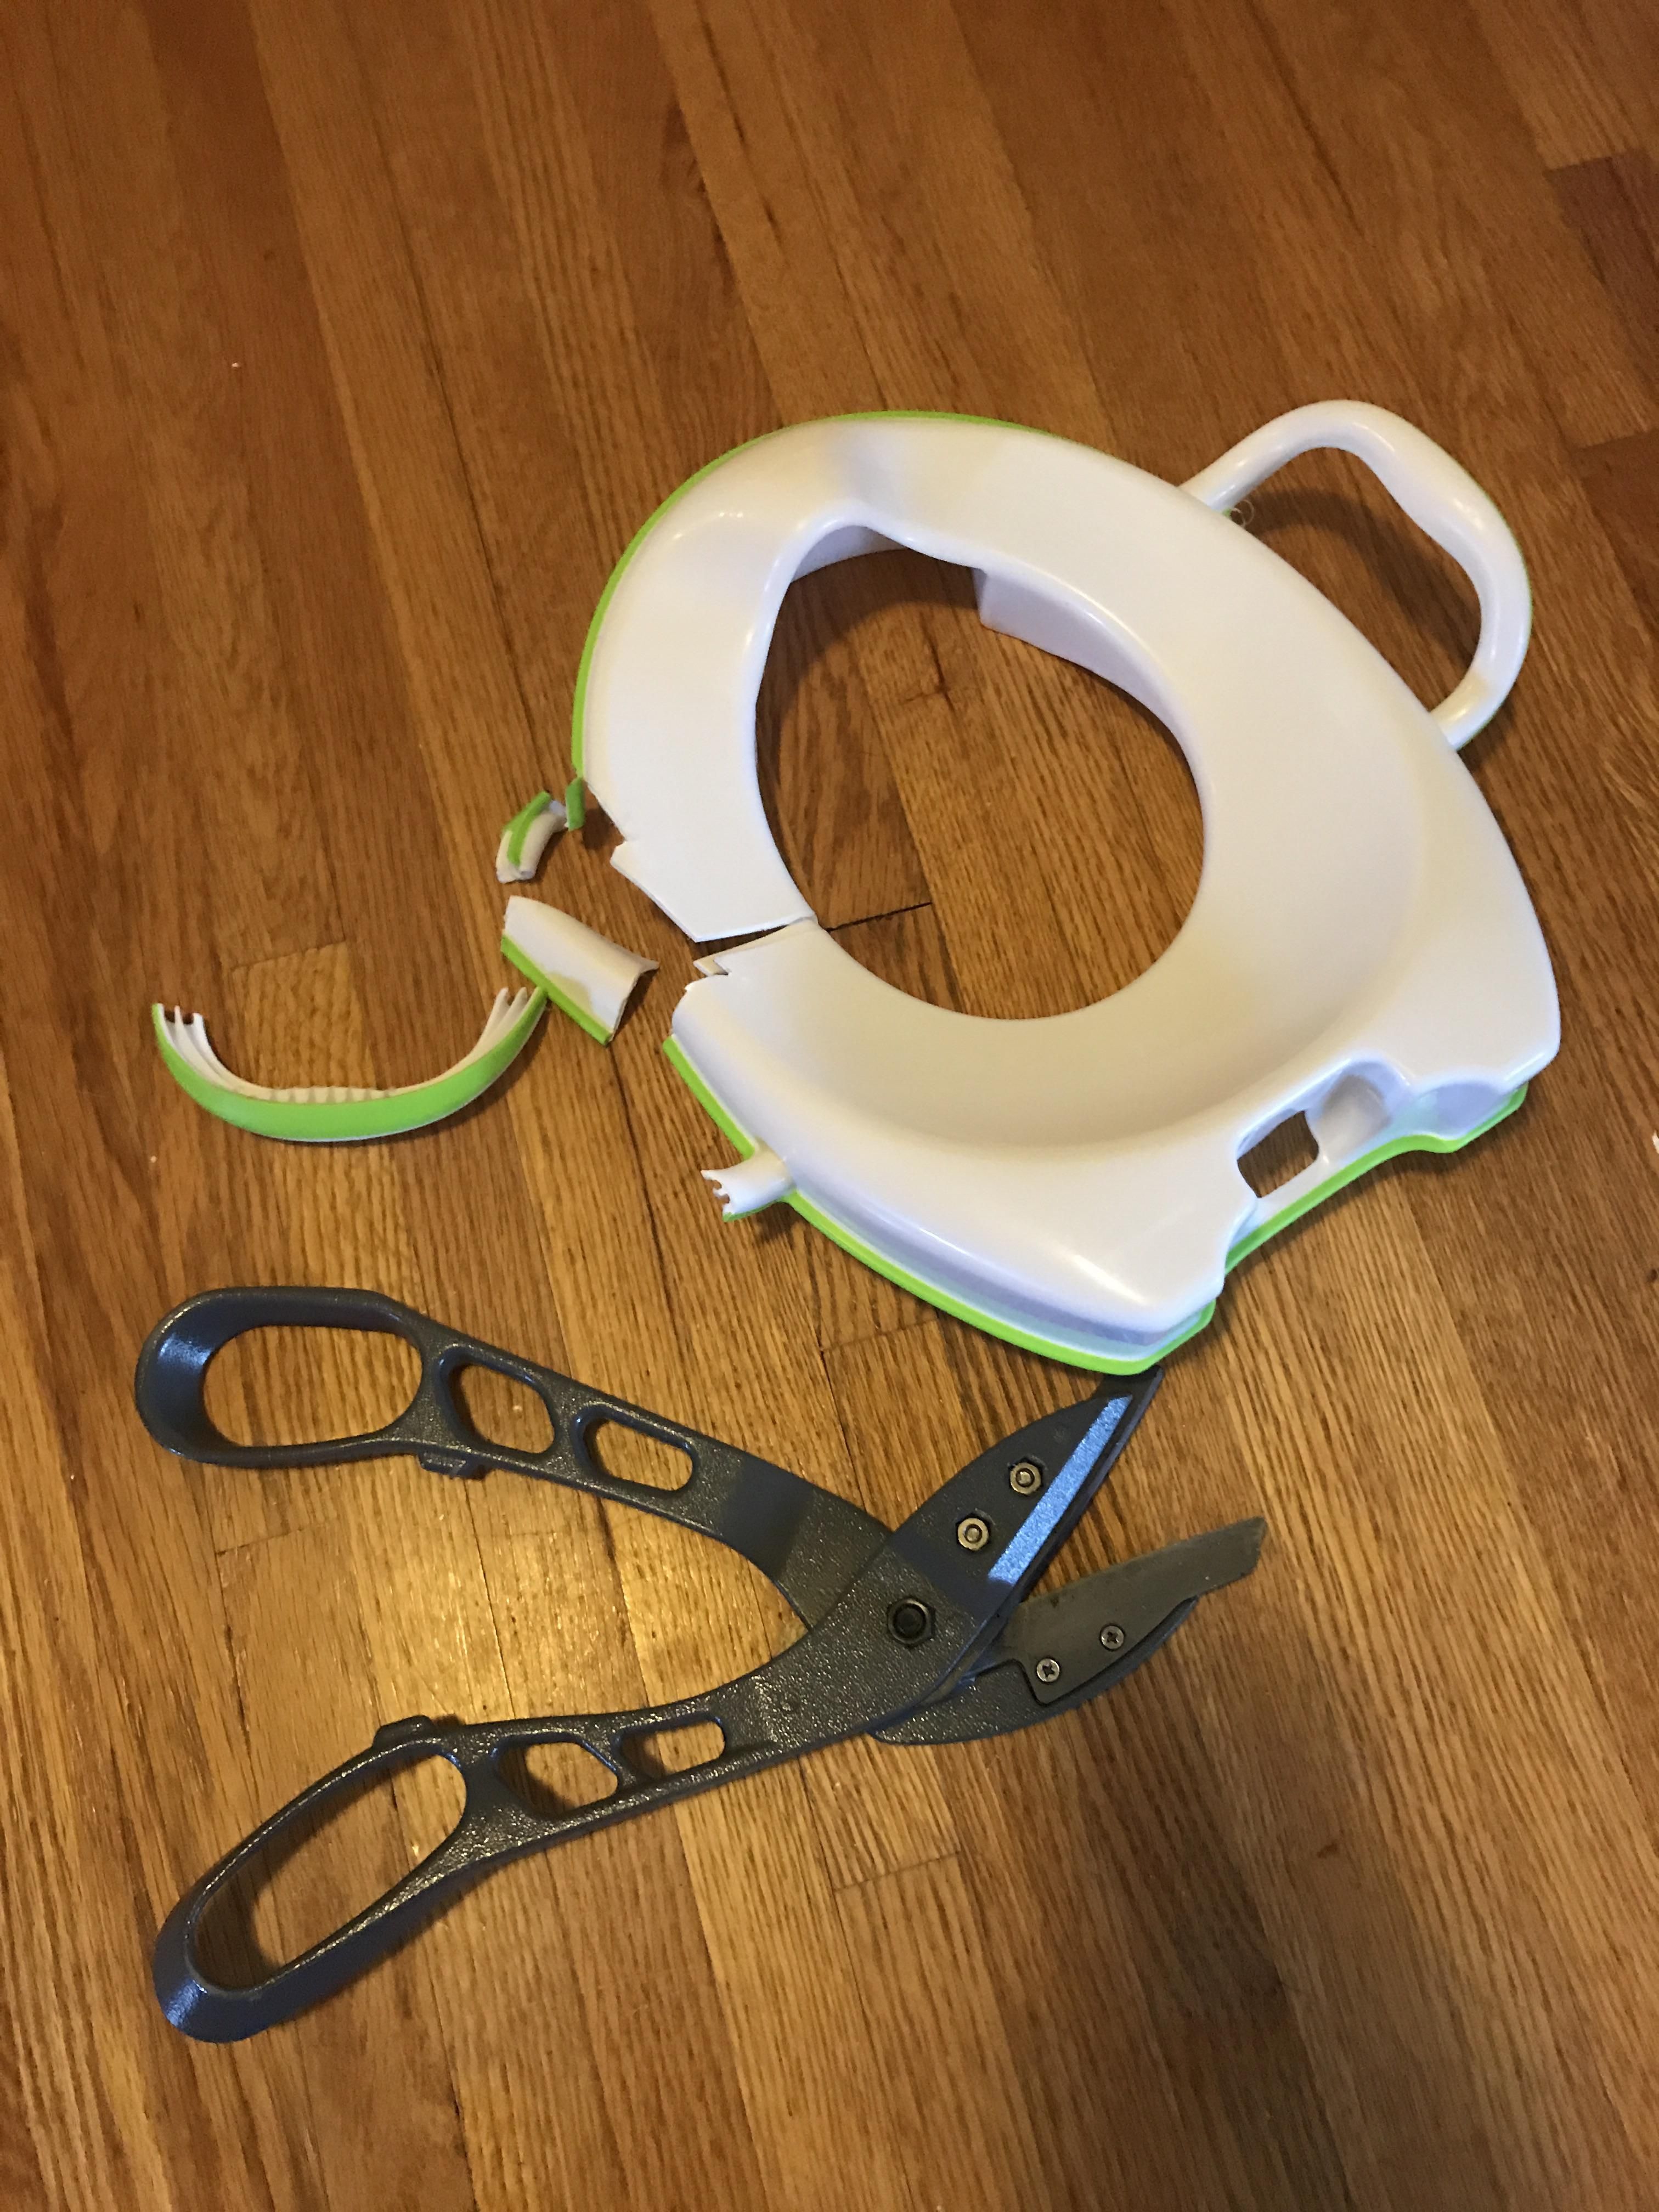 Potty training week 1: My daughter gets her head stuck in the toilet seat and we have to cut her out. She survived unharmed.